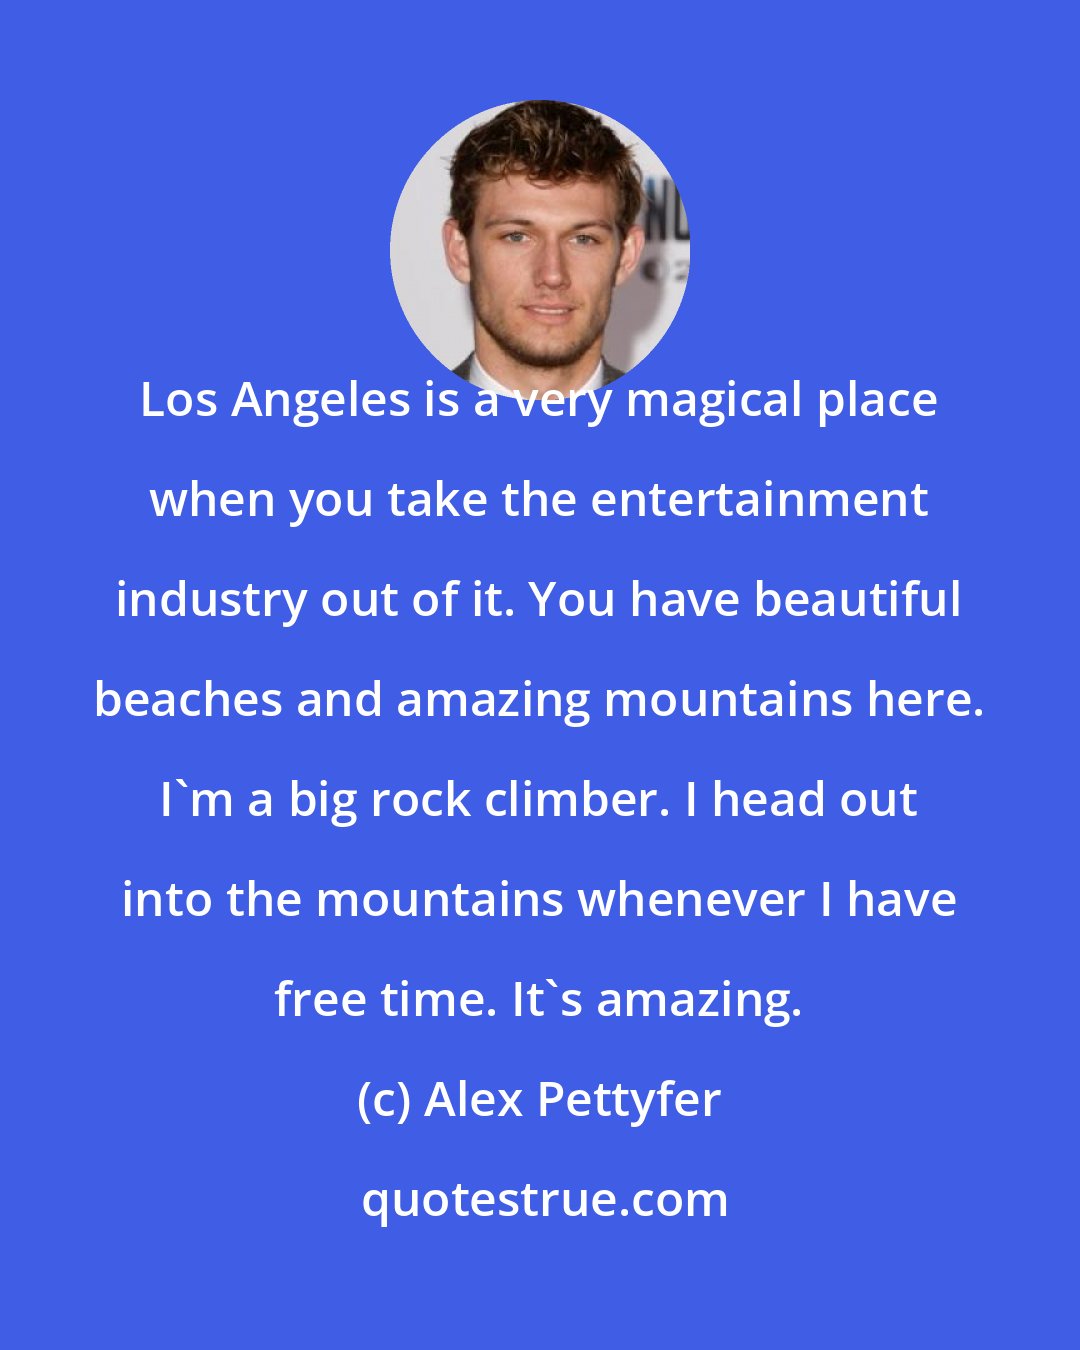 Alex Pettyfer: Los Angeles is a very magical place when you take the entertainment industry out of it. You have beautiful beaches and amazing mountains here. I'm a big rock climber. I head out into the mountains whenever I have free time. It's amazing.